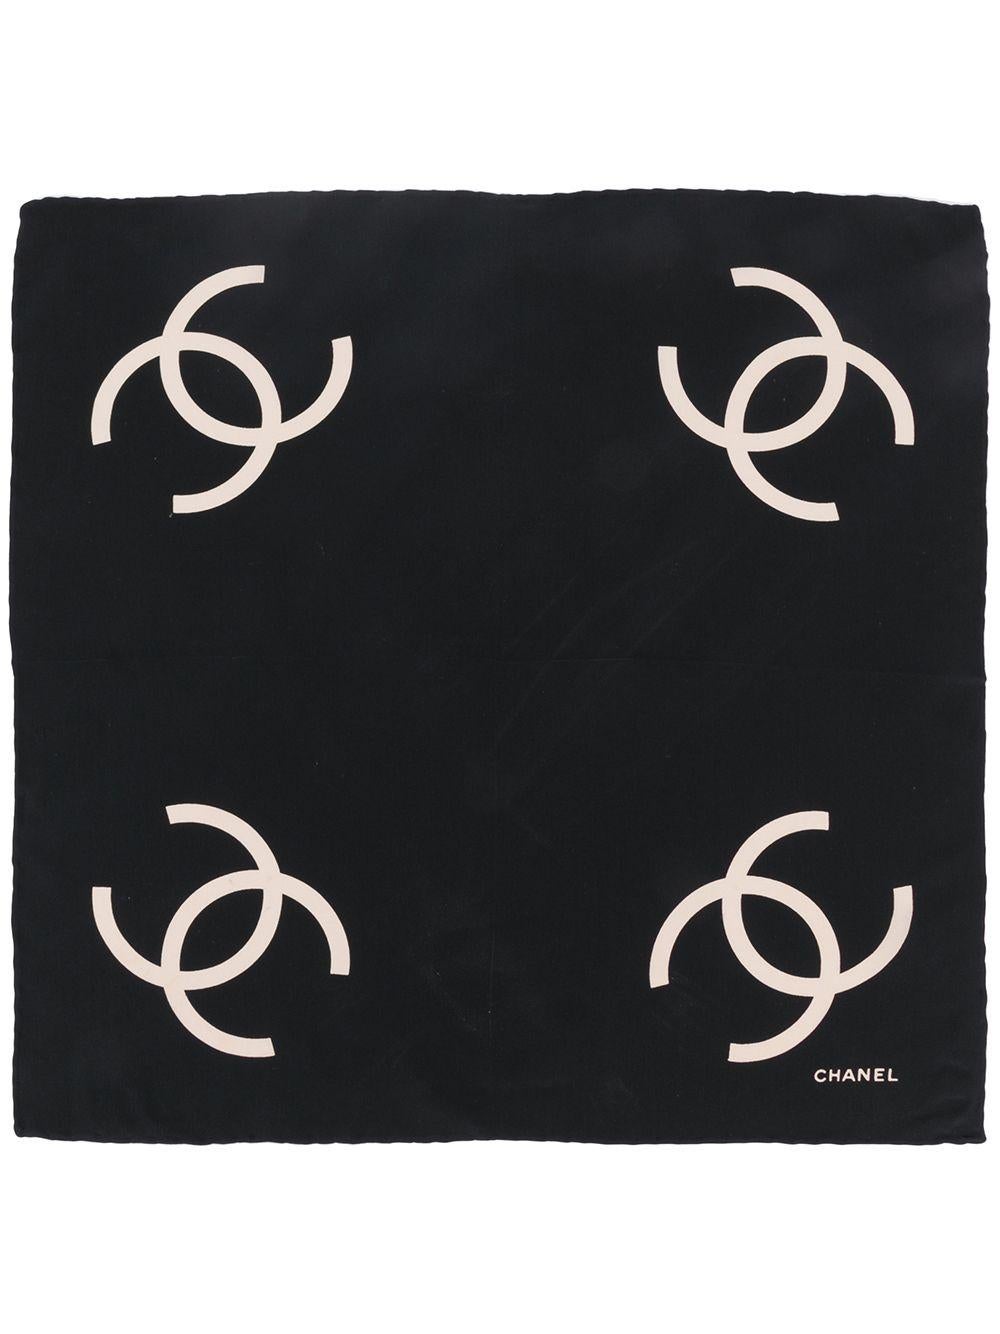 Crafted in France from the finest silk in a contrasting palette of black and cream, this pre-owned handkerchief by Chanel features a lightweight construction, a square shape and an elegant, all-over print of the brand's iconic interlocking 'CC' logo